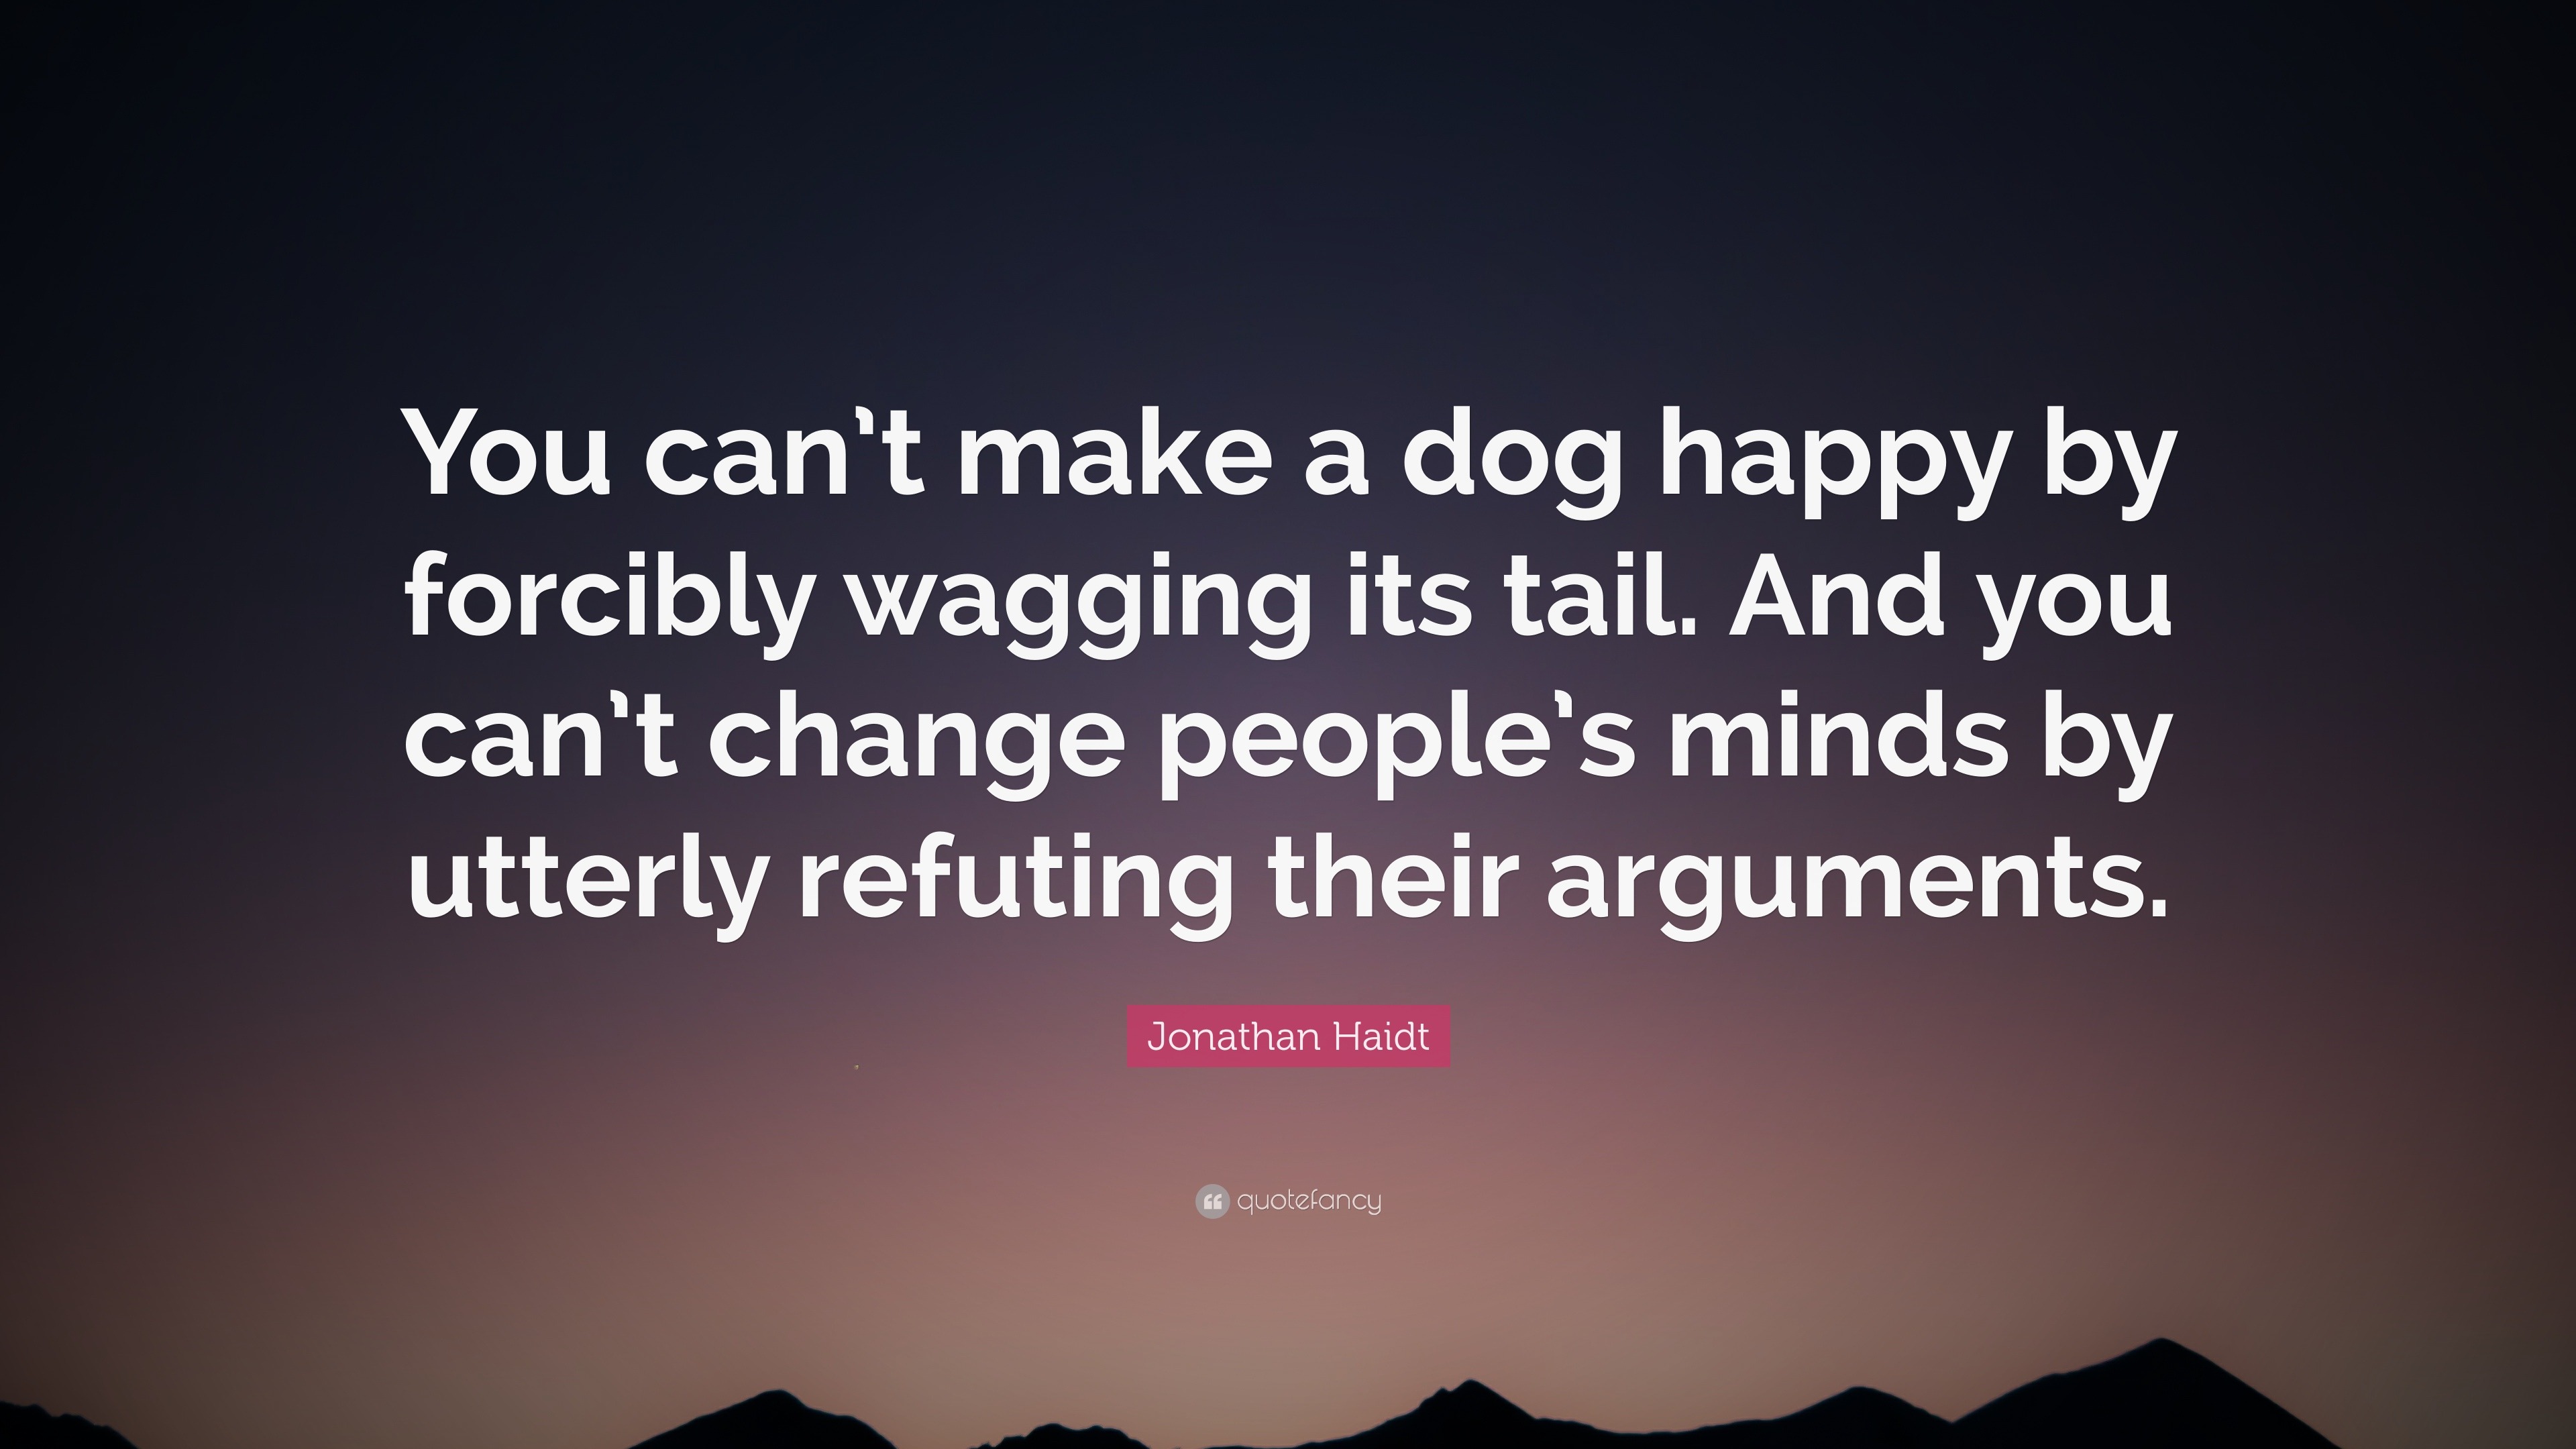 Jonathan Haidt Quote: “You can’t make a dog happy by forcibly wagging ...